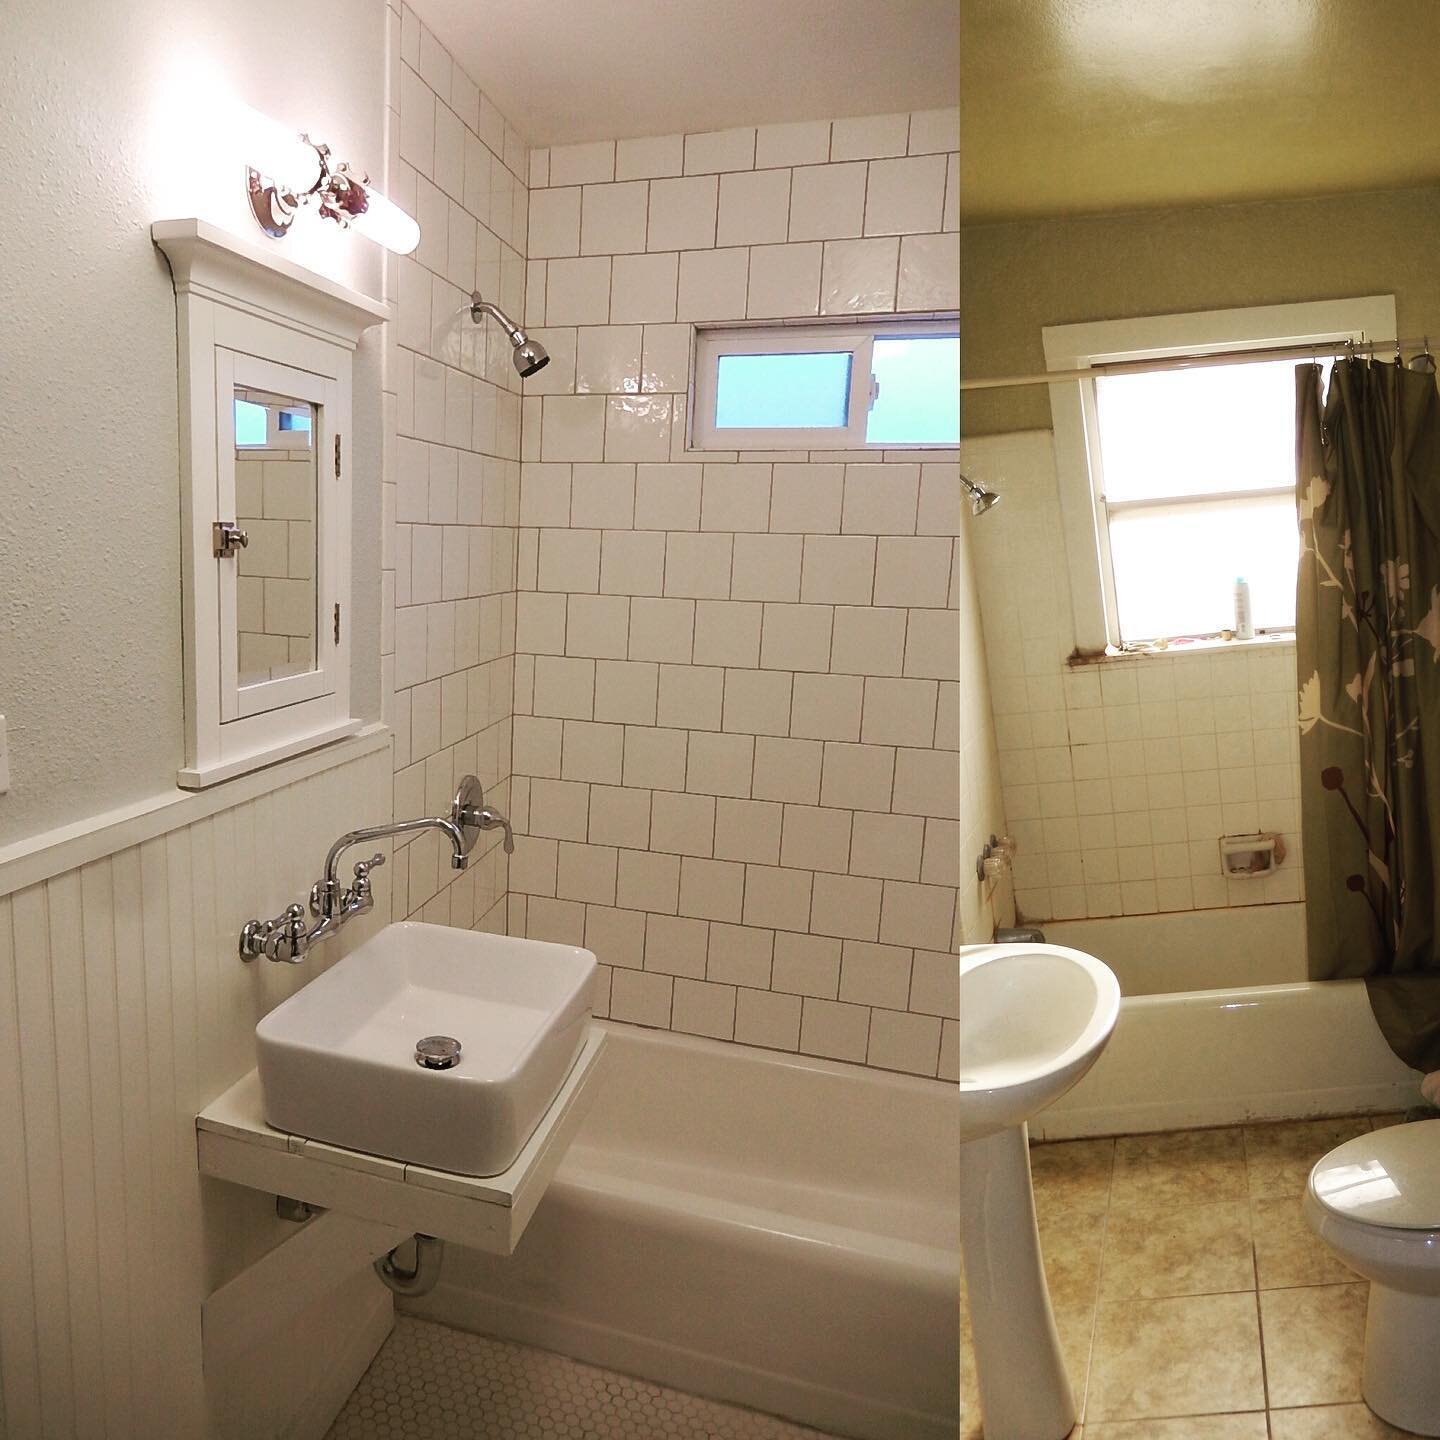 Just a simple cottage bathroom from our TX project. It went from stinky and dingy to clean and bright. Bring more beauty into the world.